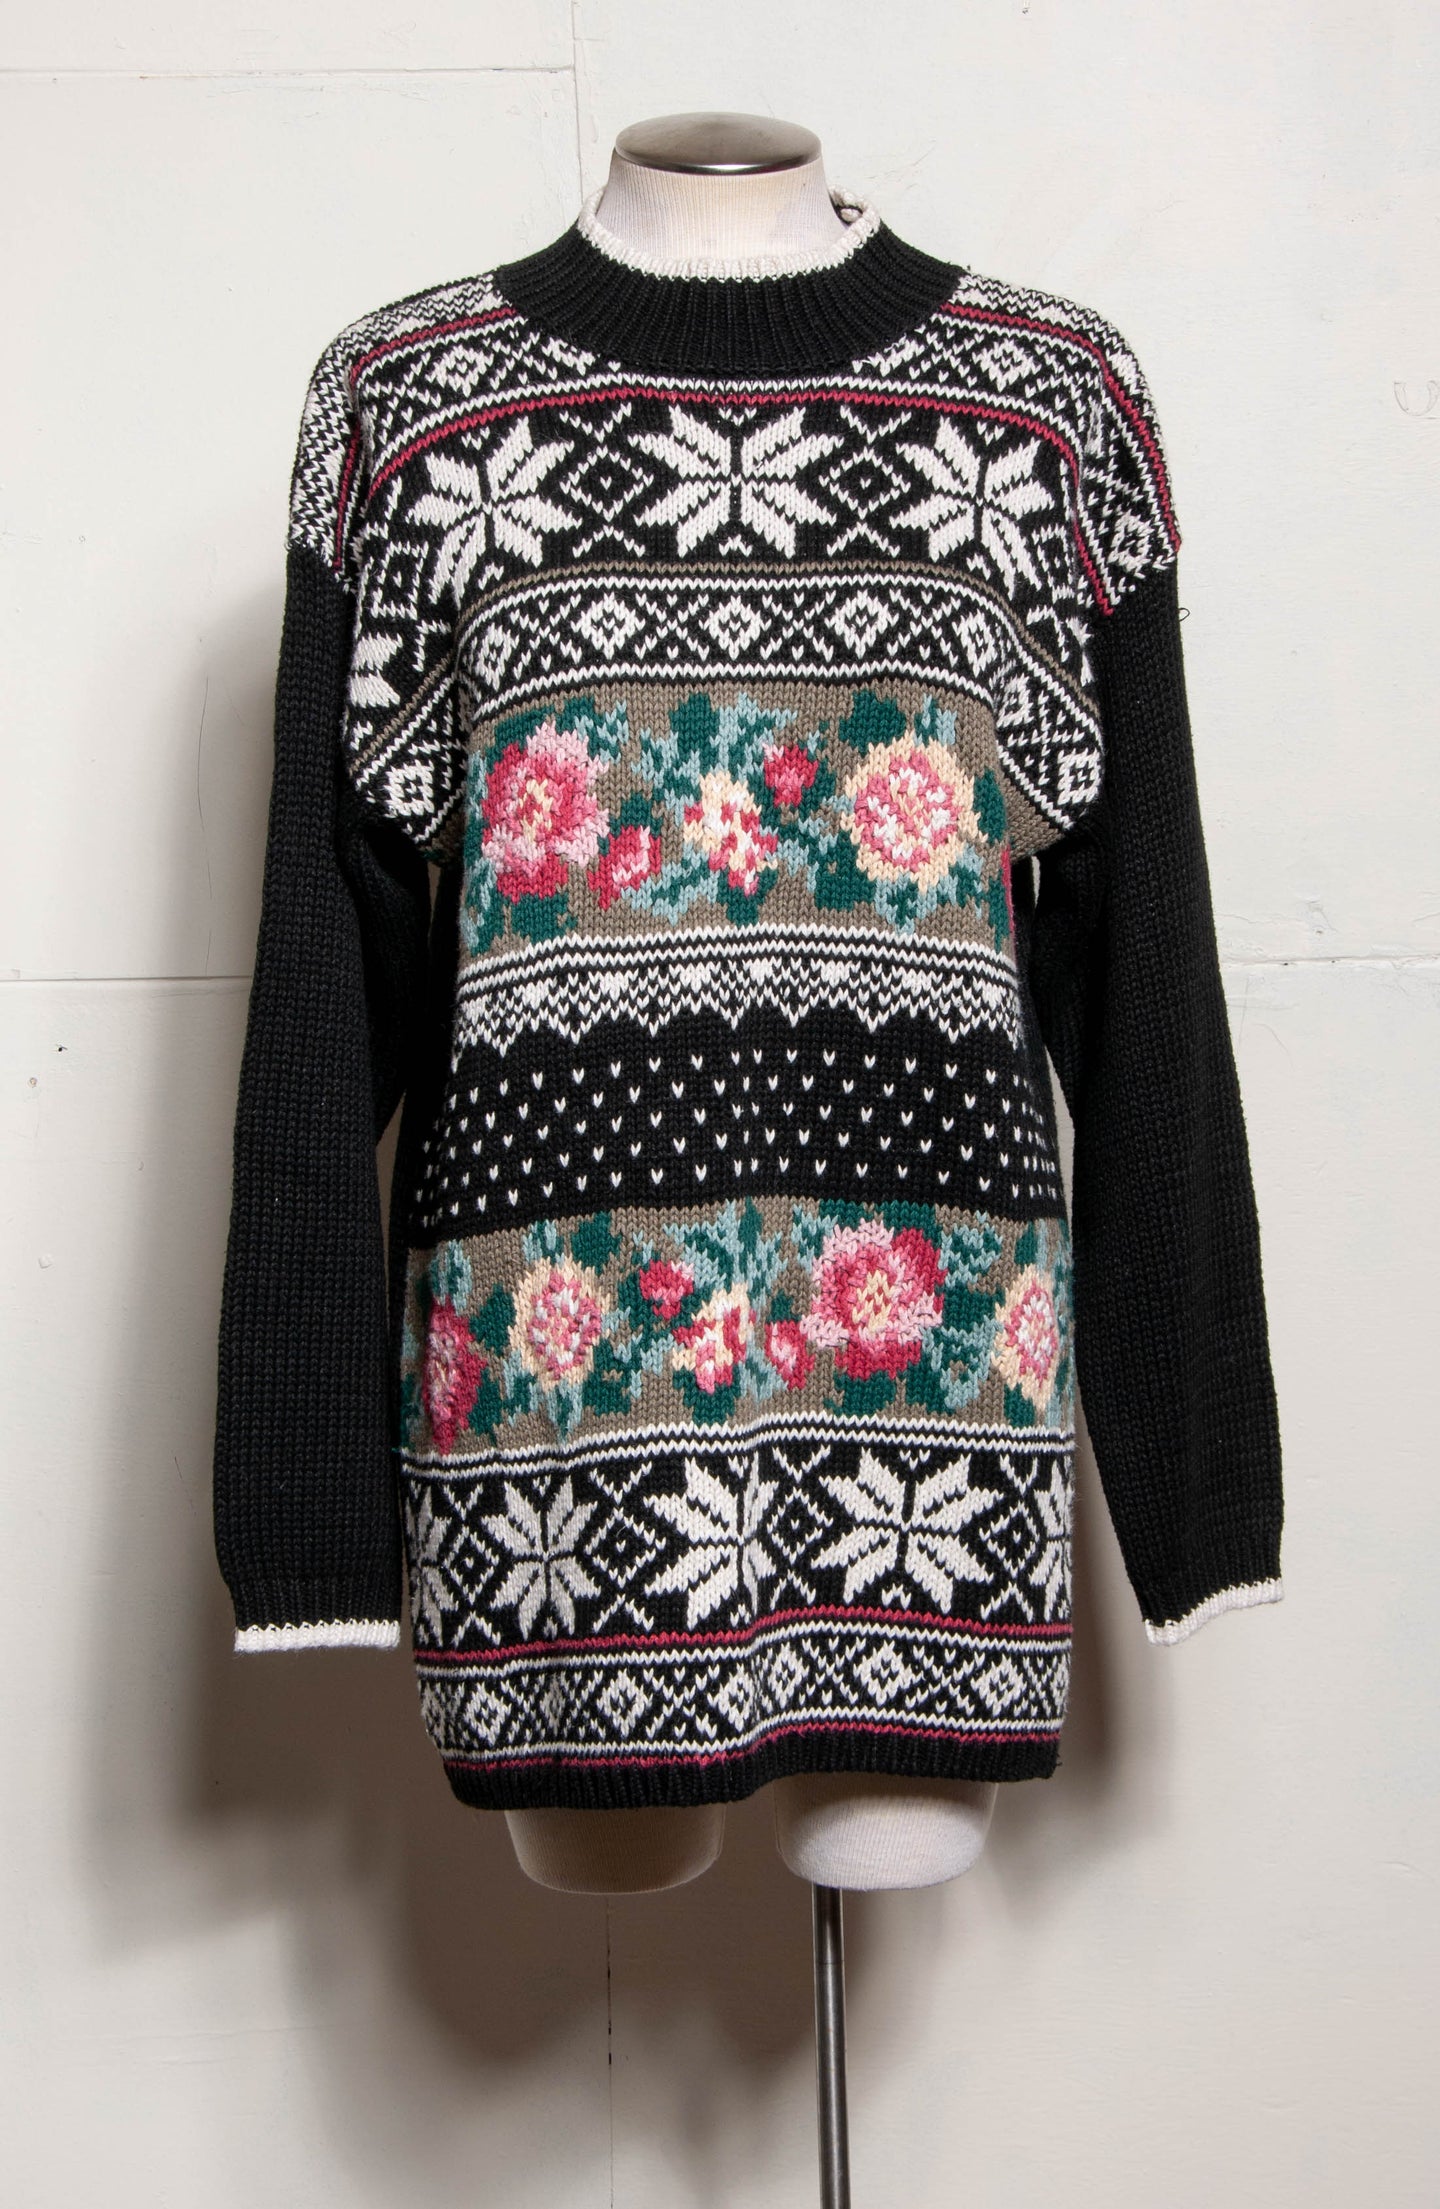 VINTAGE 1990S FLORAL ON BLACK BACKGROUND KNIT TUNIC SWEATER